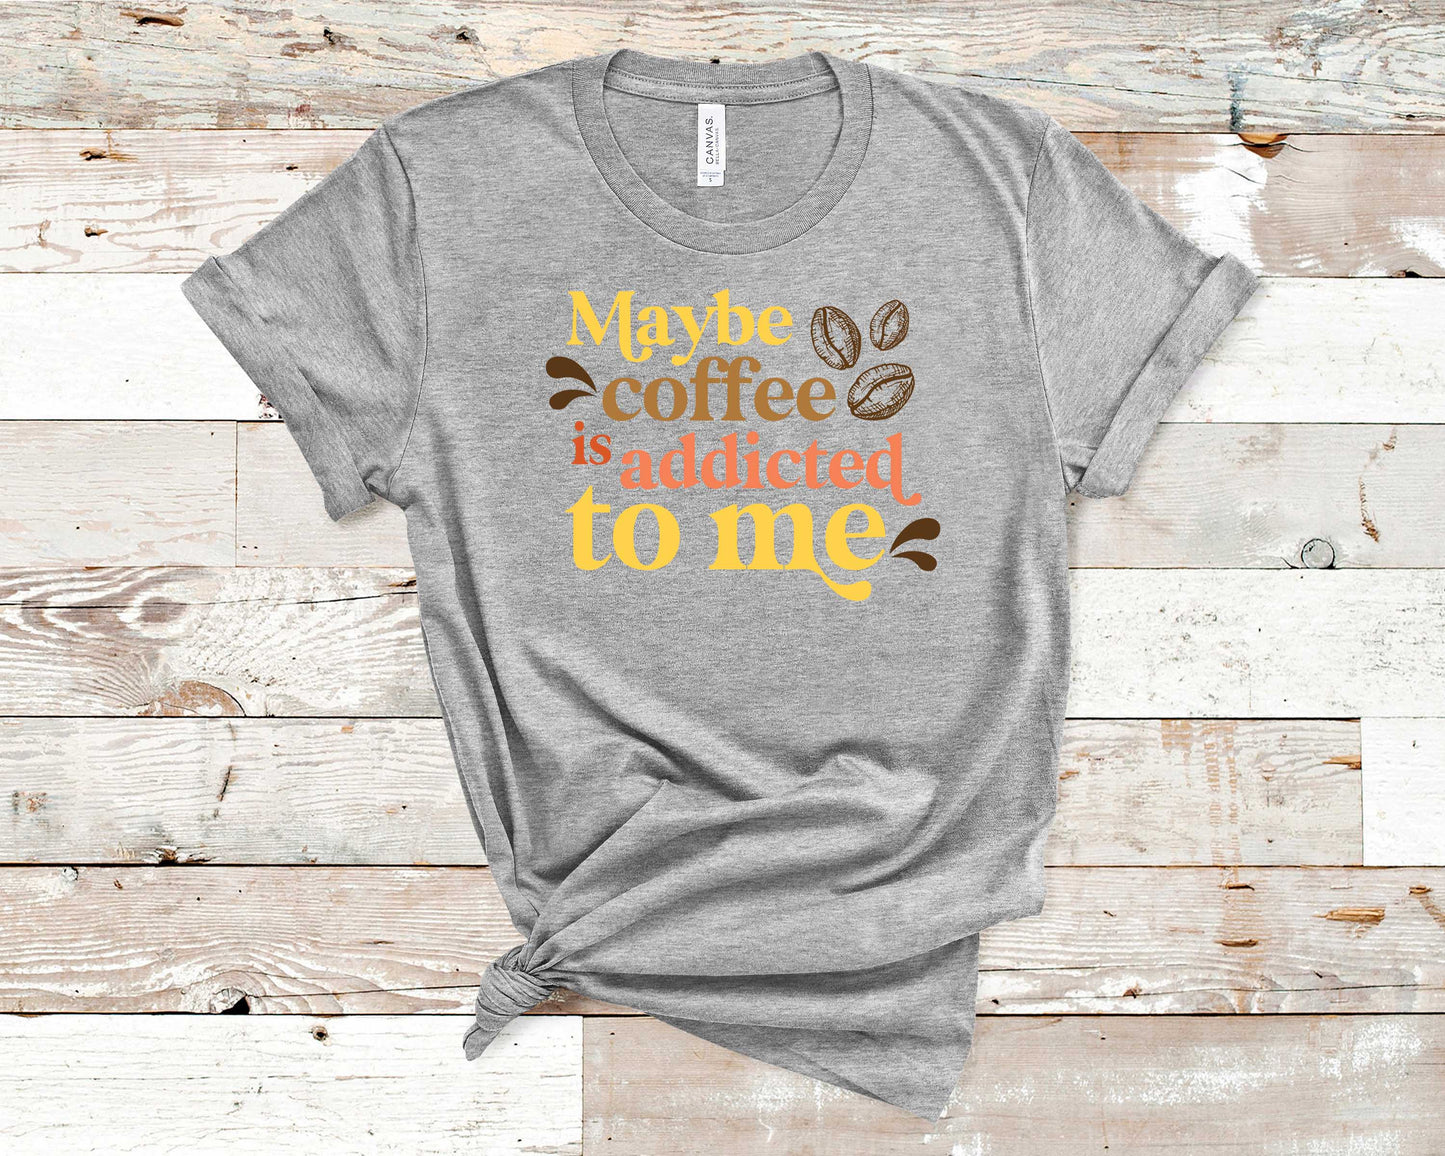 Maybe Coffee Is Addicted To Me - Coffee Lovers